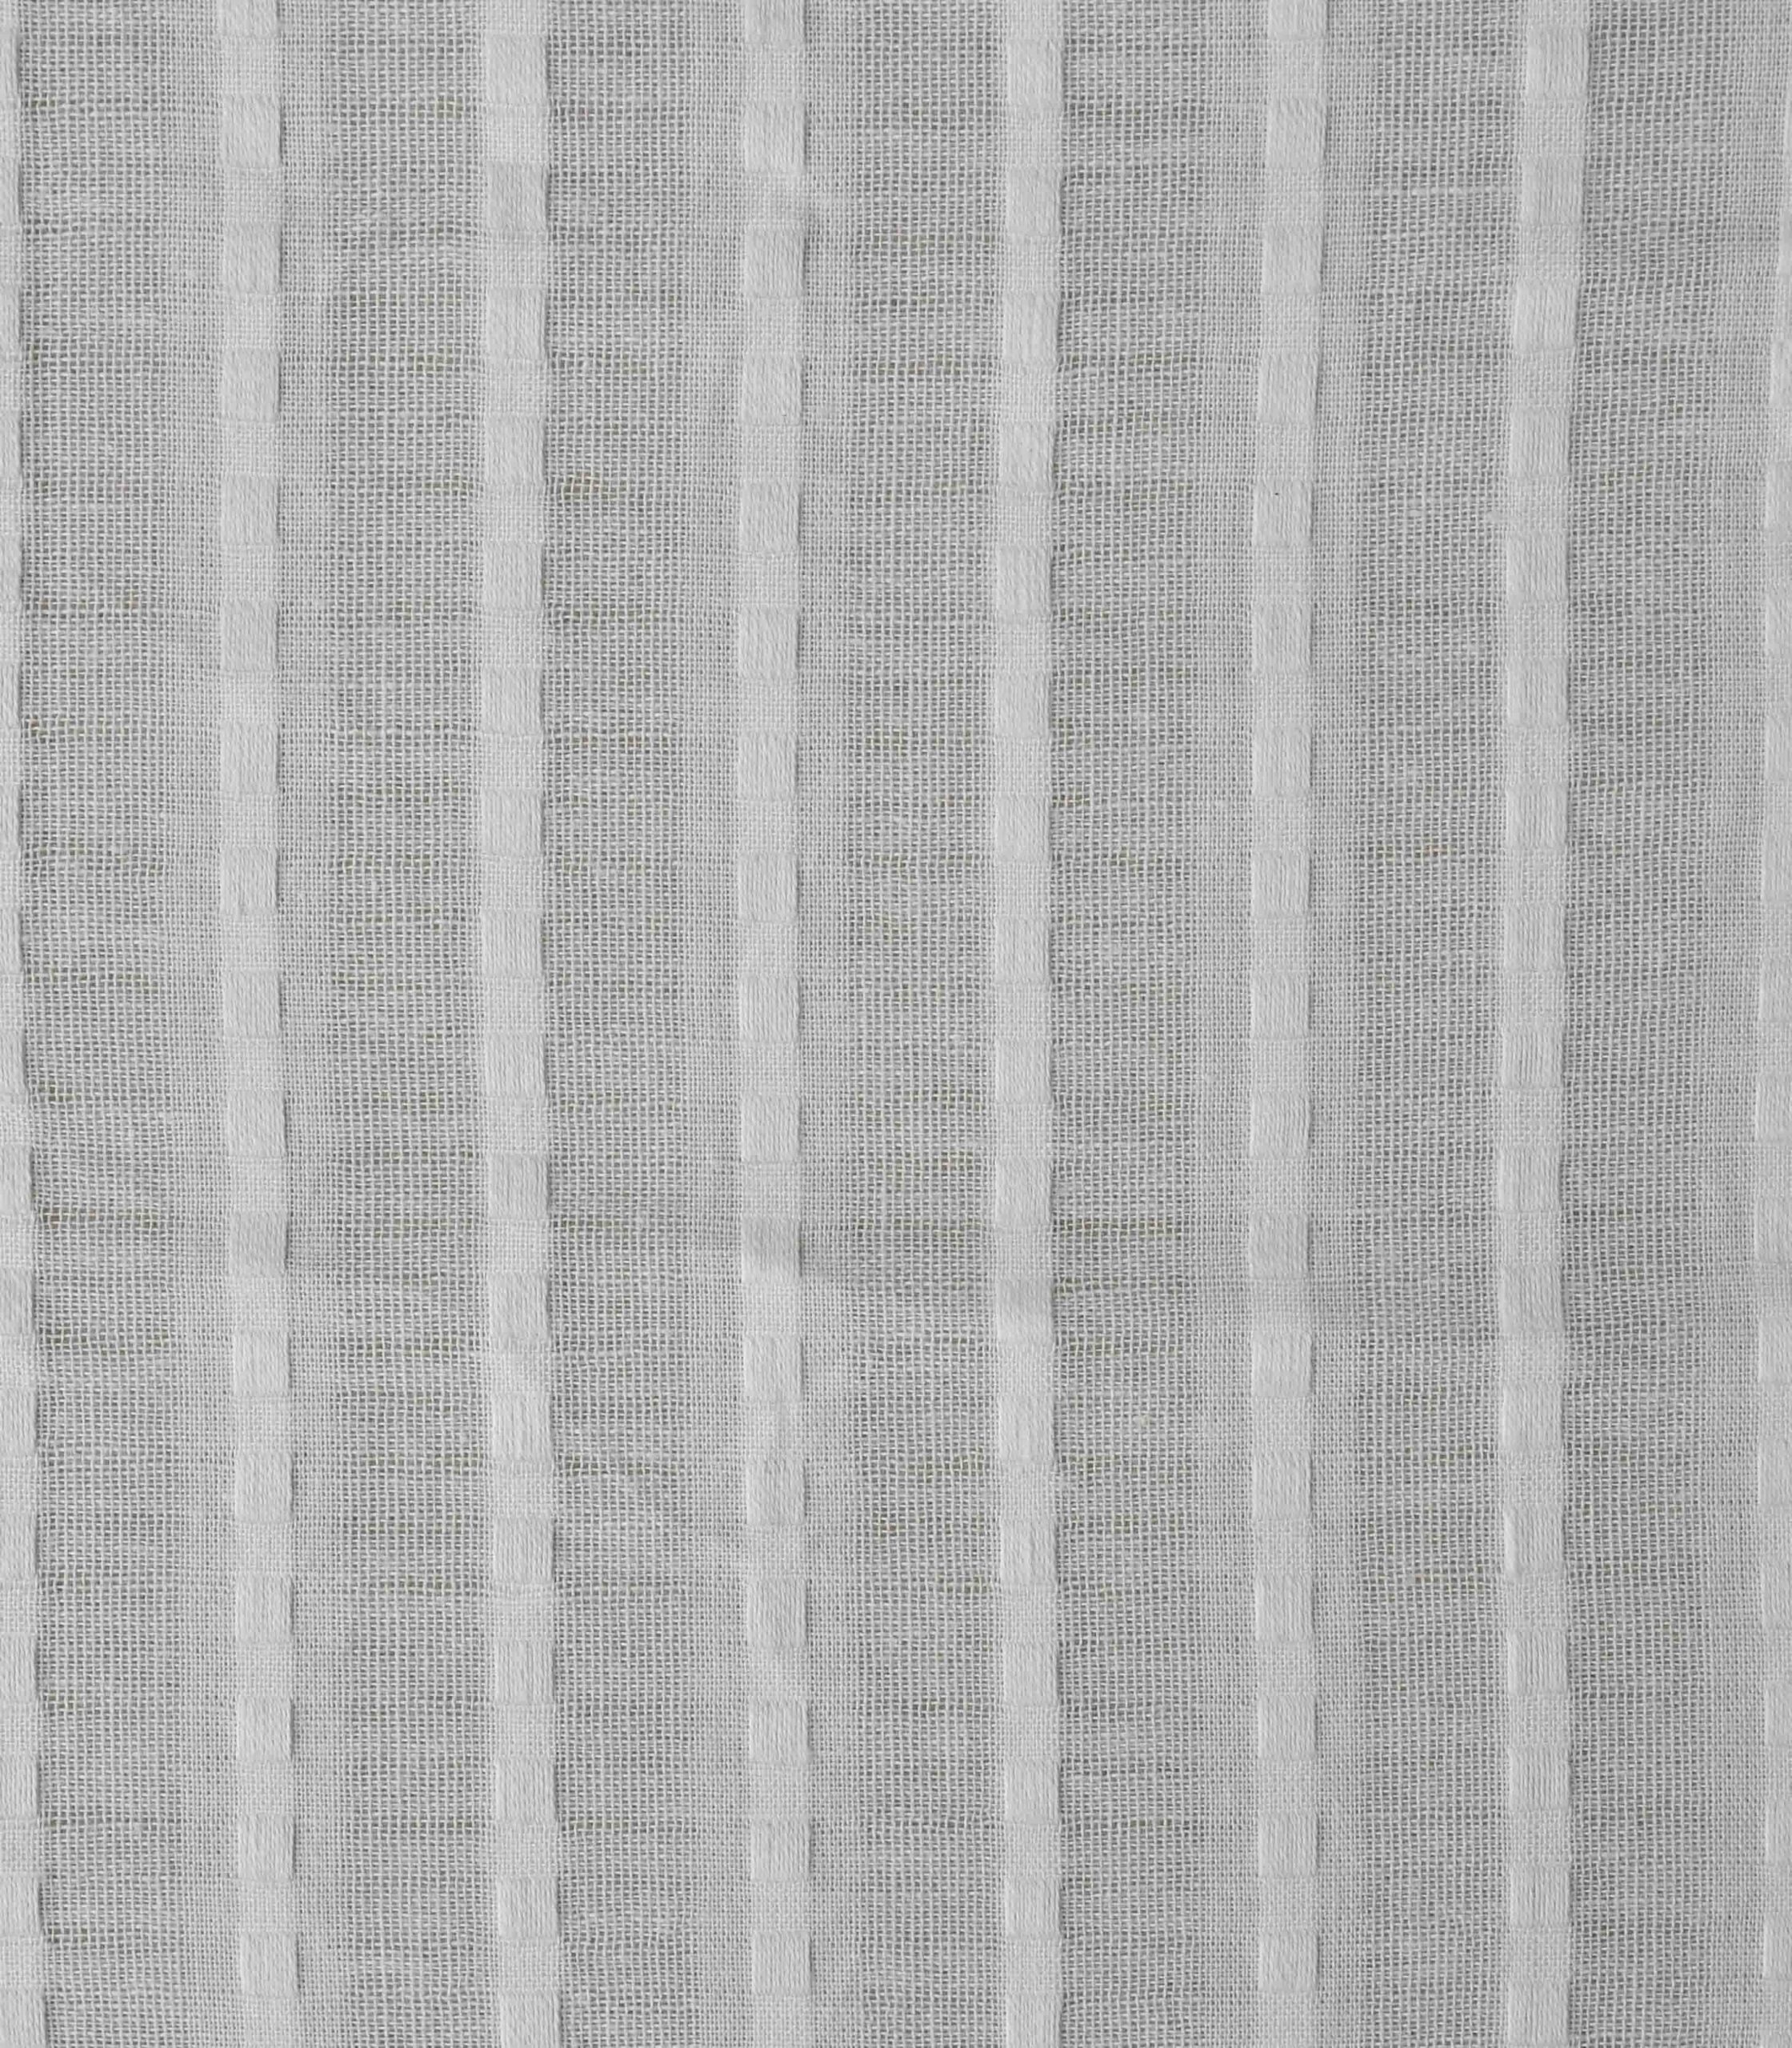 Cotton Dobby RFD Woven Fabric (FC-R3572) - Dinesh Exports